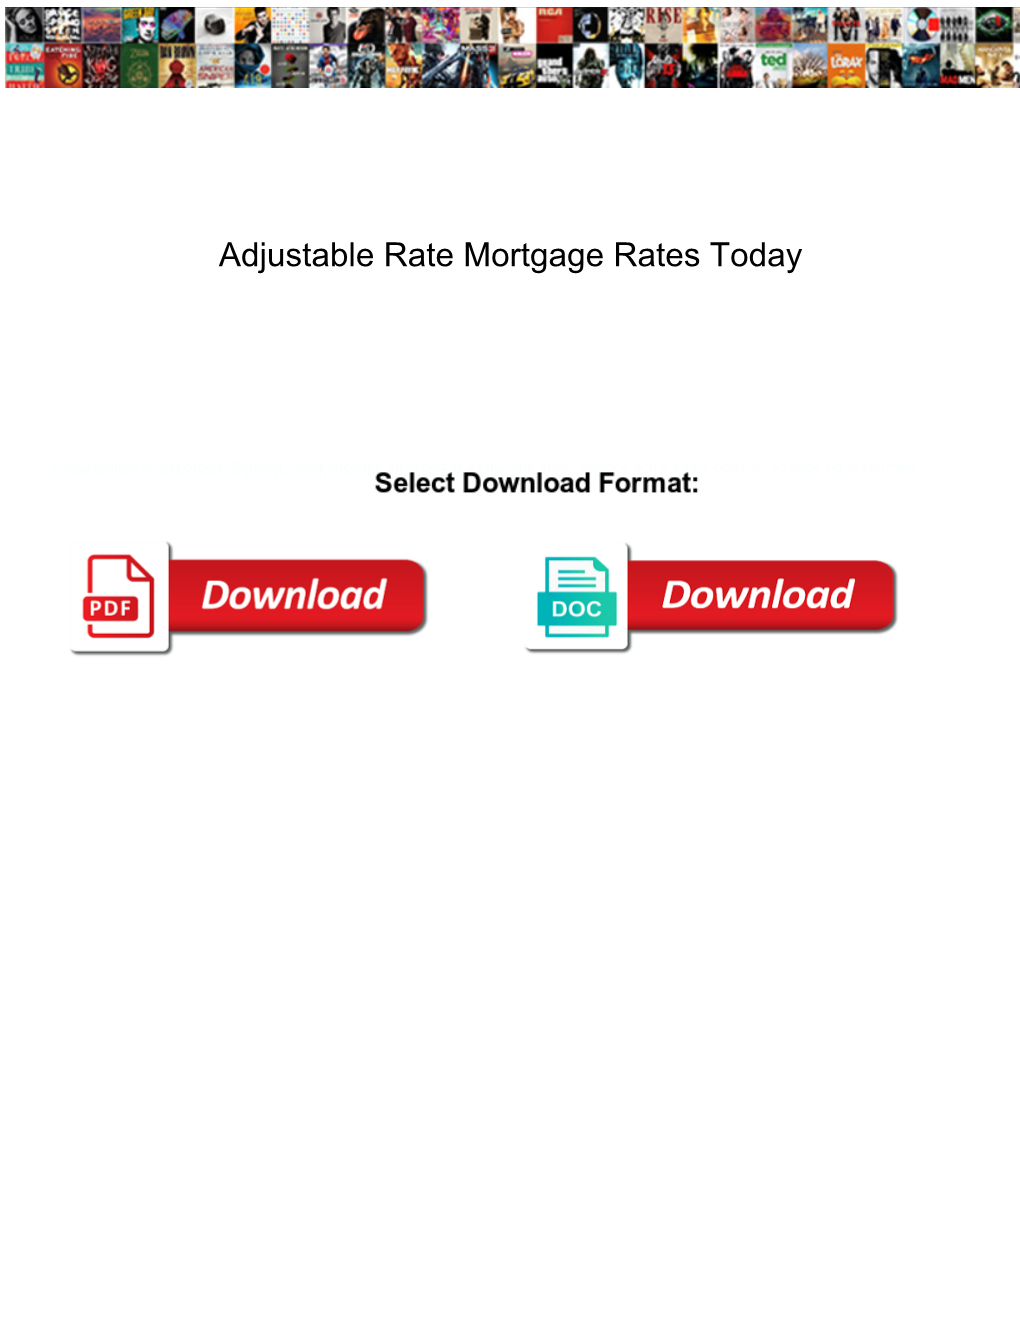 Adjustable Rate Mortgage Rates Today